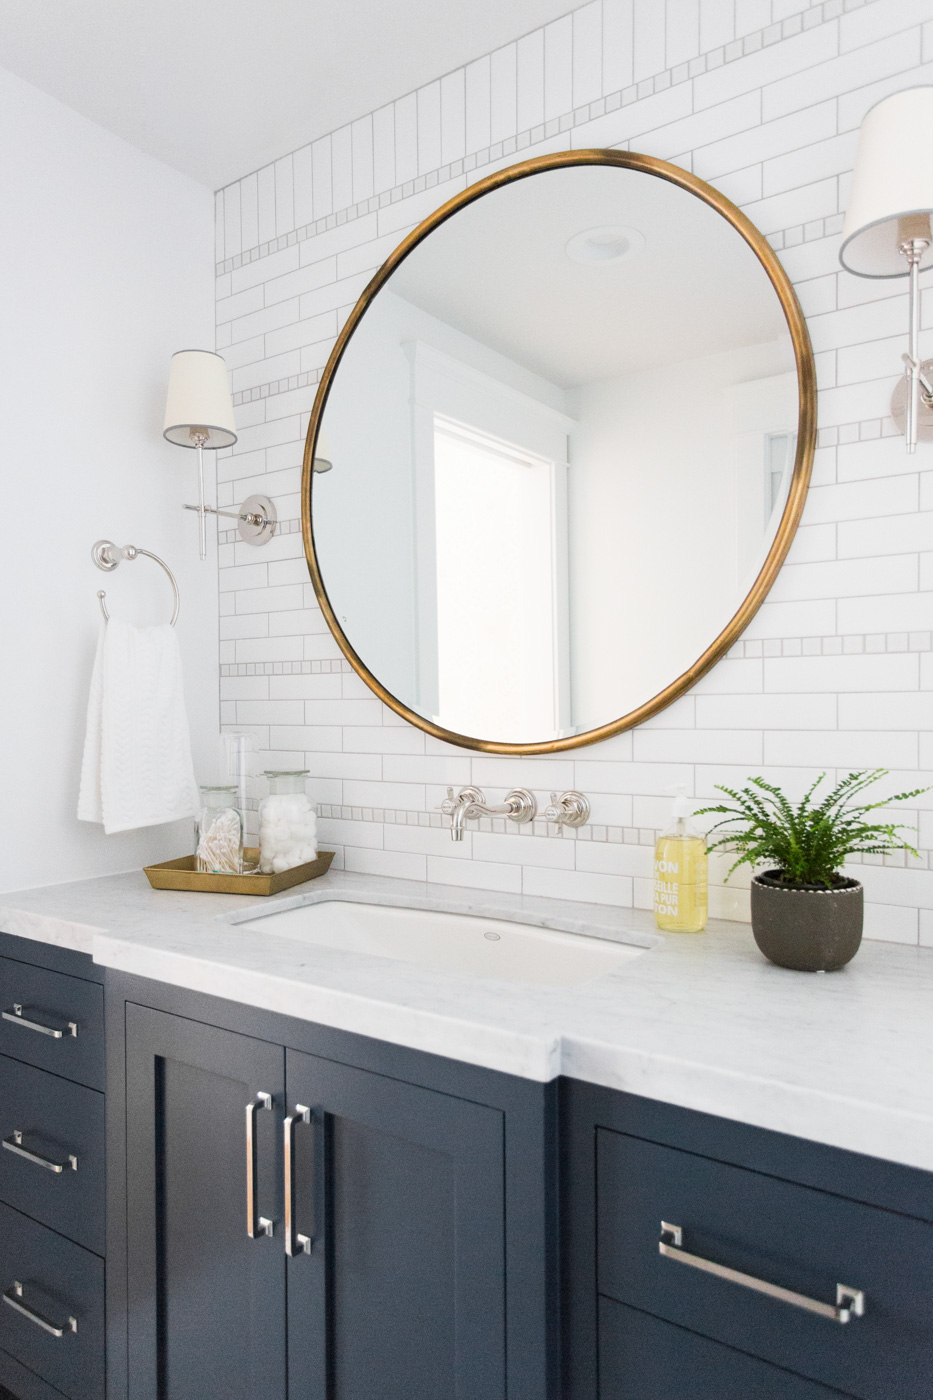 Bathroom Mirrors Are Going Full Circle, Bathroom Vanity Light With Round Mirror